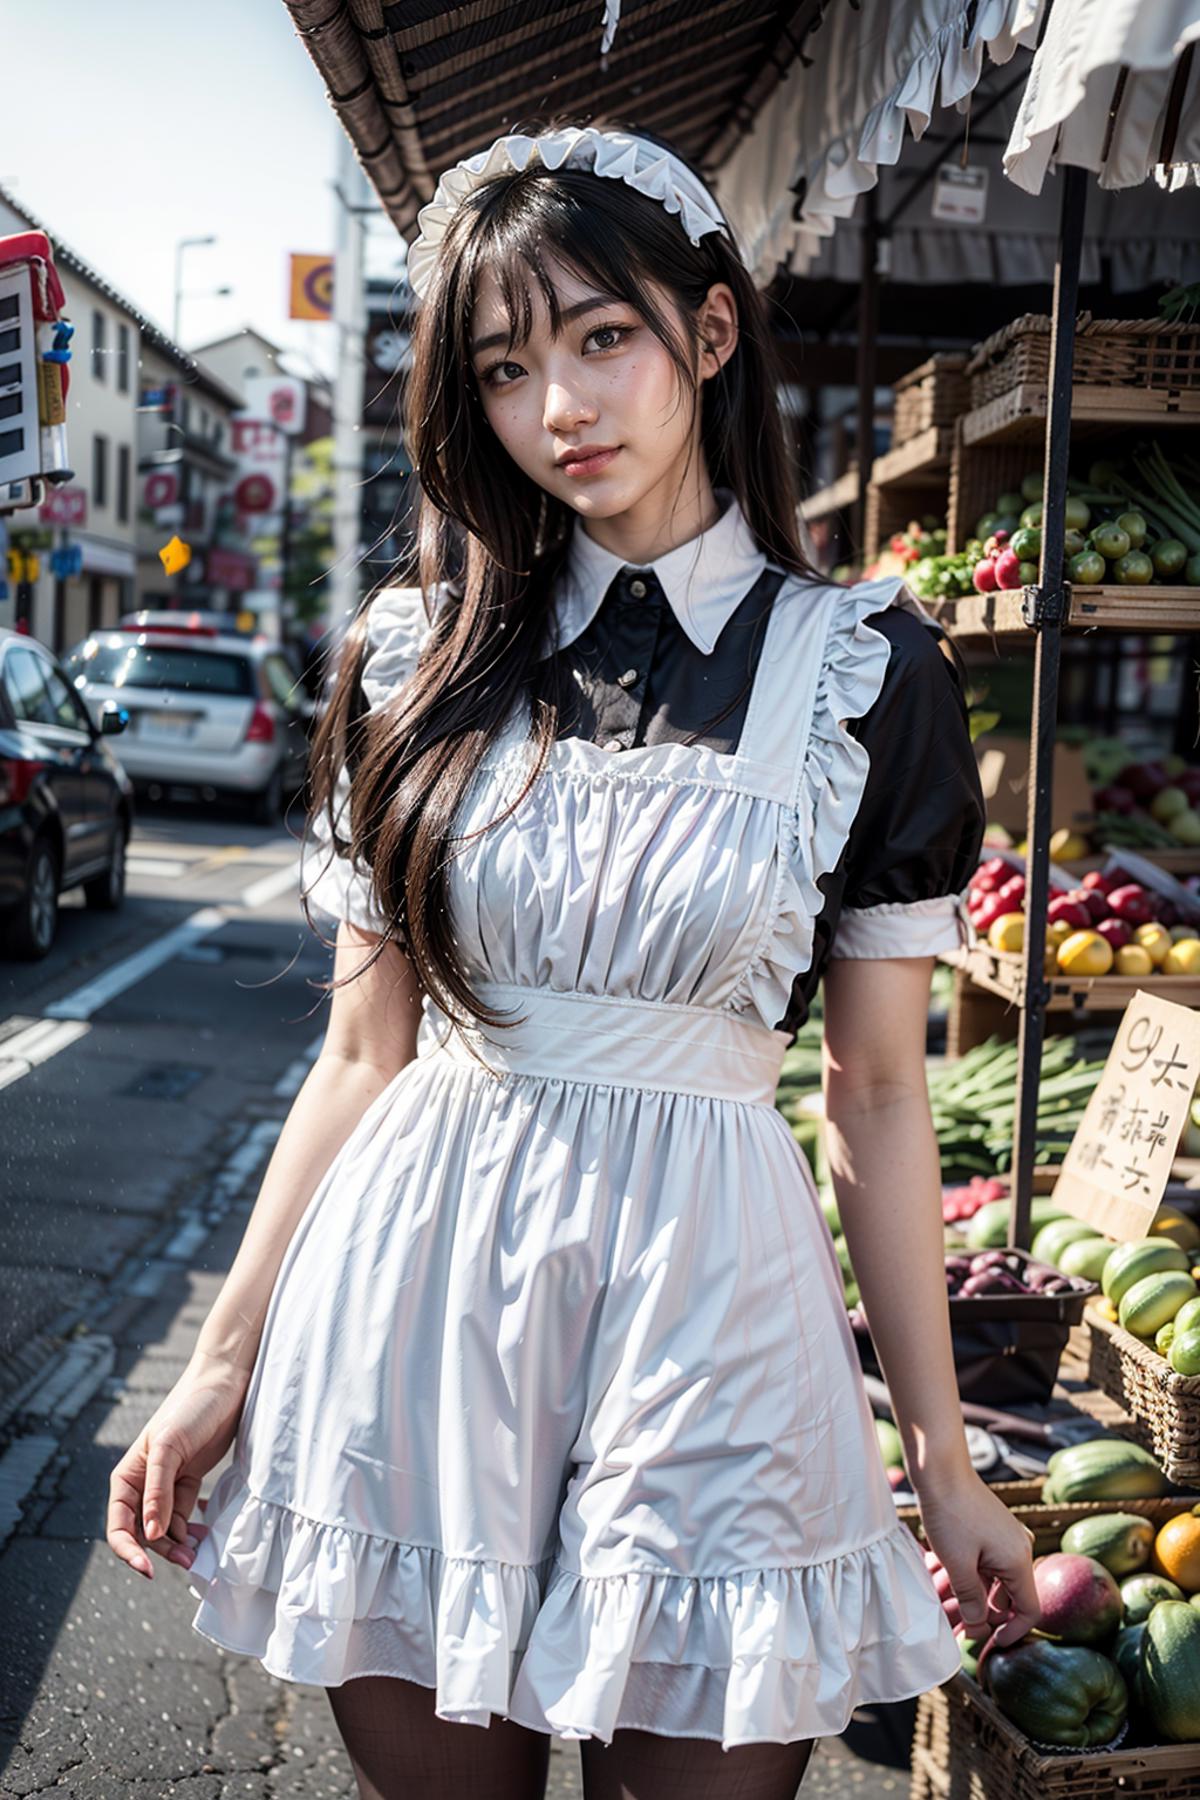 Maid costume | 女仆装 image by feetie